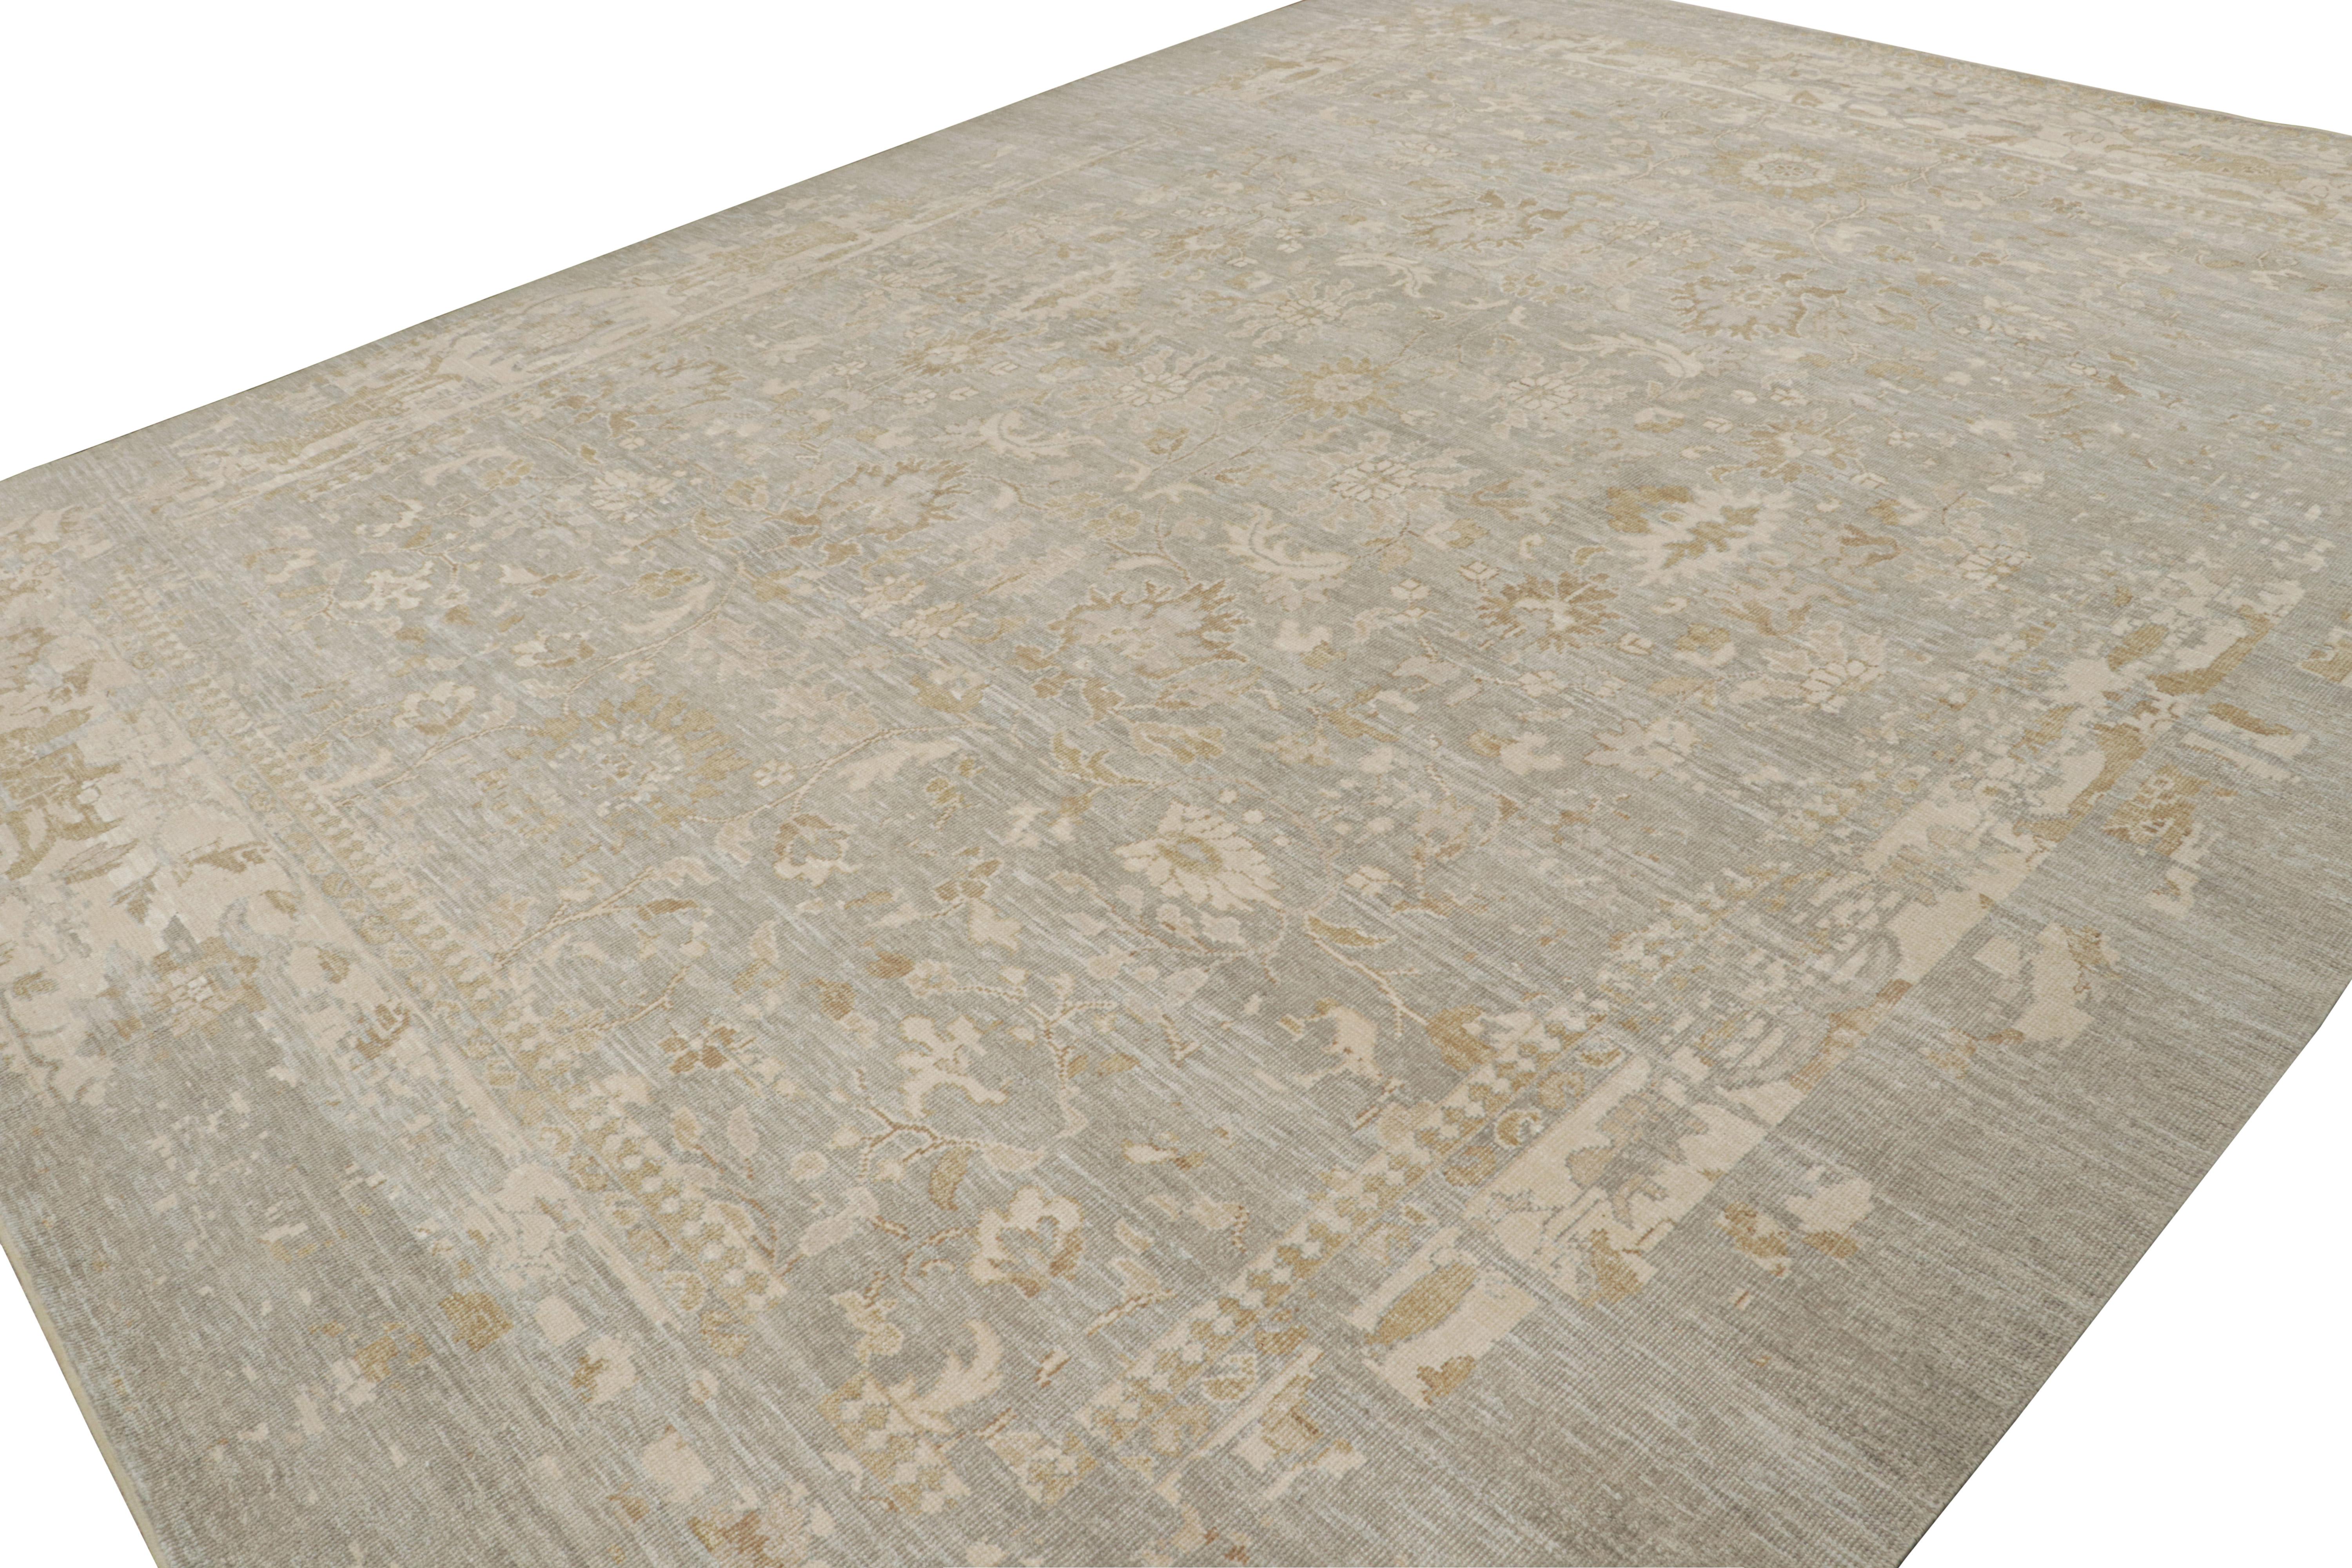 This 12x15 rug is inspired by antique Oushak rugs—from a bold new Modern Classics Collection by Rug & Kilim. Hand-knotted in silk, it enjoys grey & beige-brown floral patterns.

On the Design:

This new line is made with a new yarn Josh Nazmiyal is